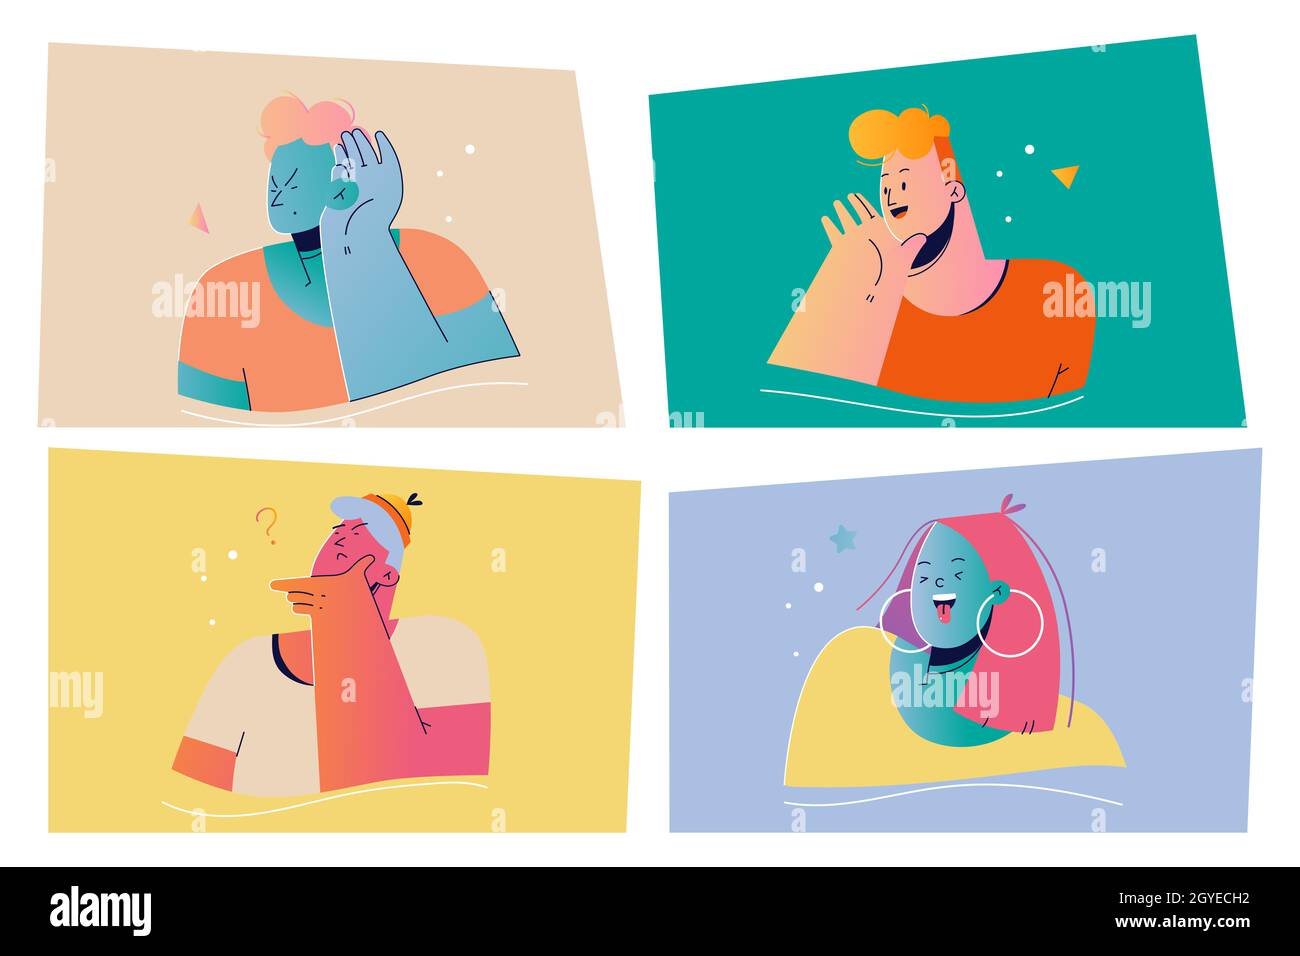 Emotion, face expression set concept. Positive negative emotional people illustration for print. Collection of men women cartoon characters thinking l Stock Photo